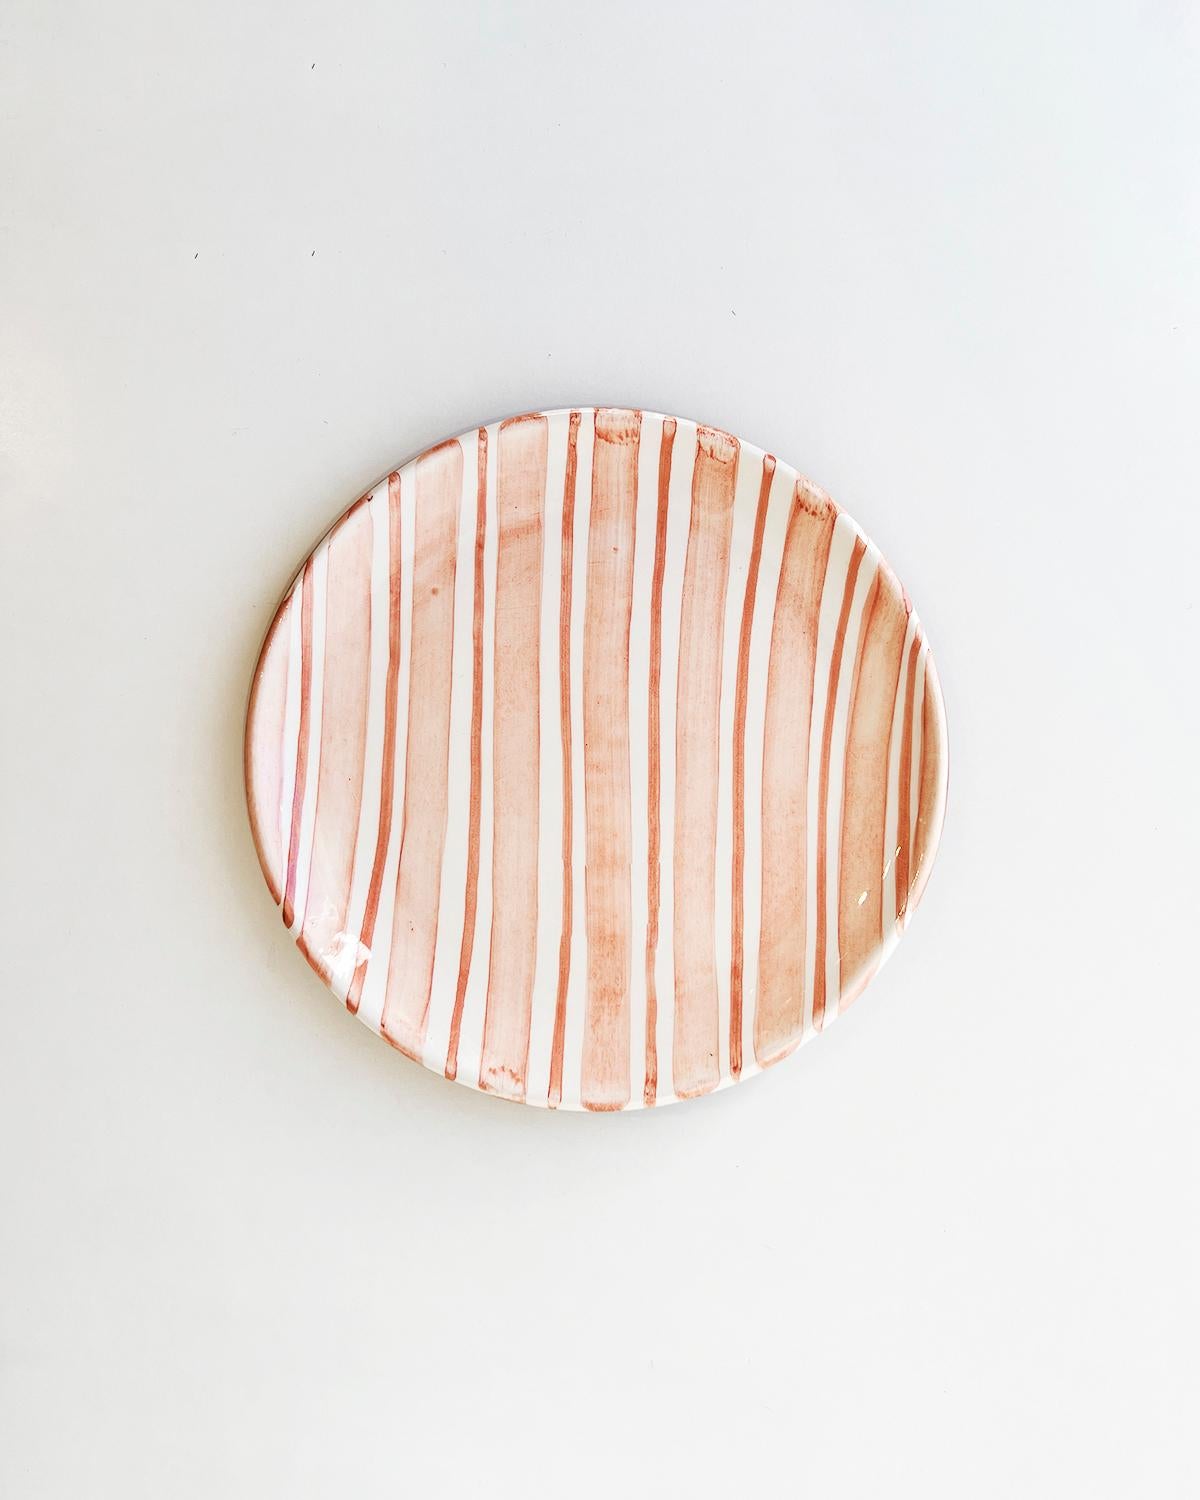 Casa Cubista Cabana Pink Striped Terracotta Salad Plates In New Condition For Sale In West Hollywood, CA